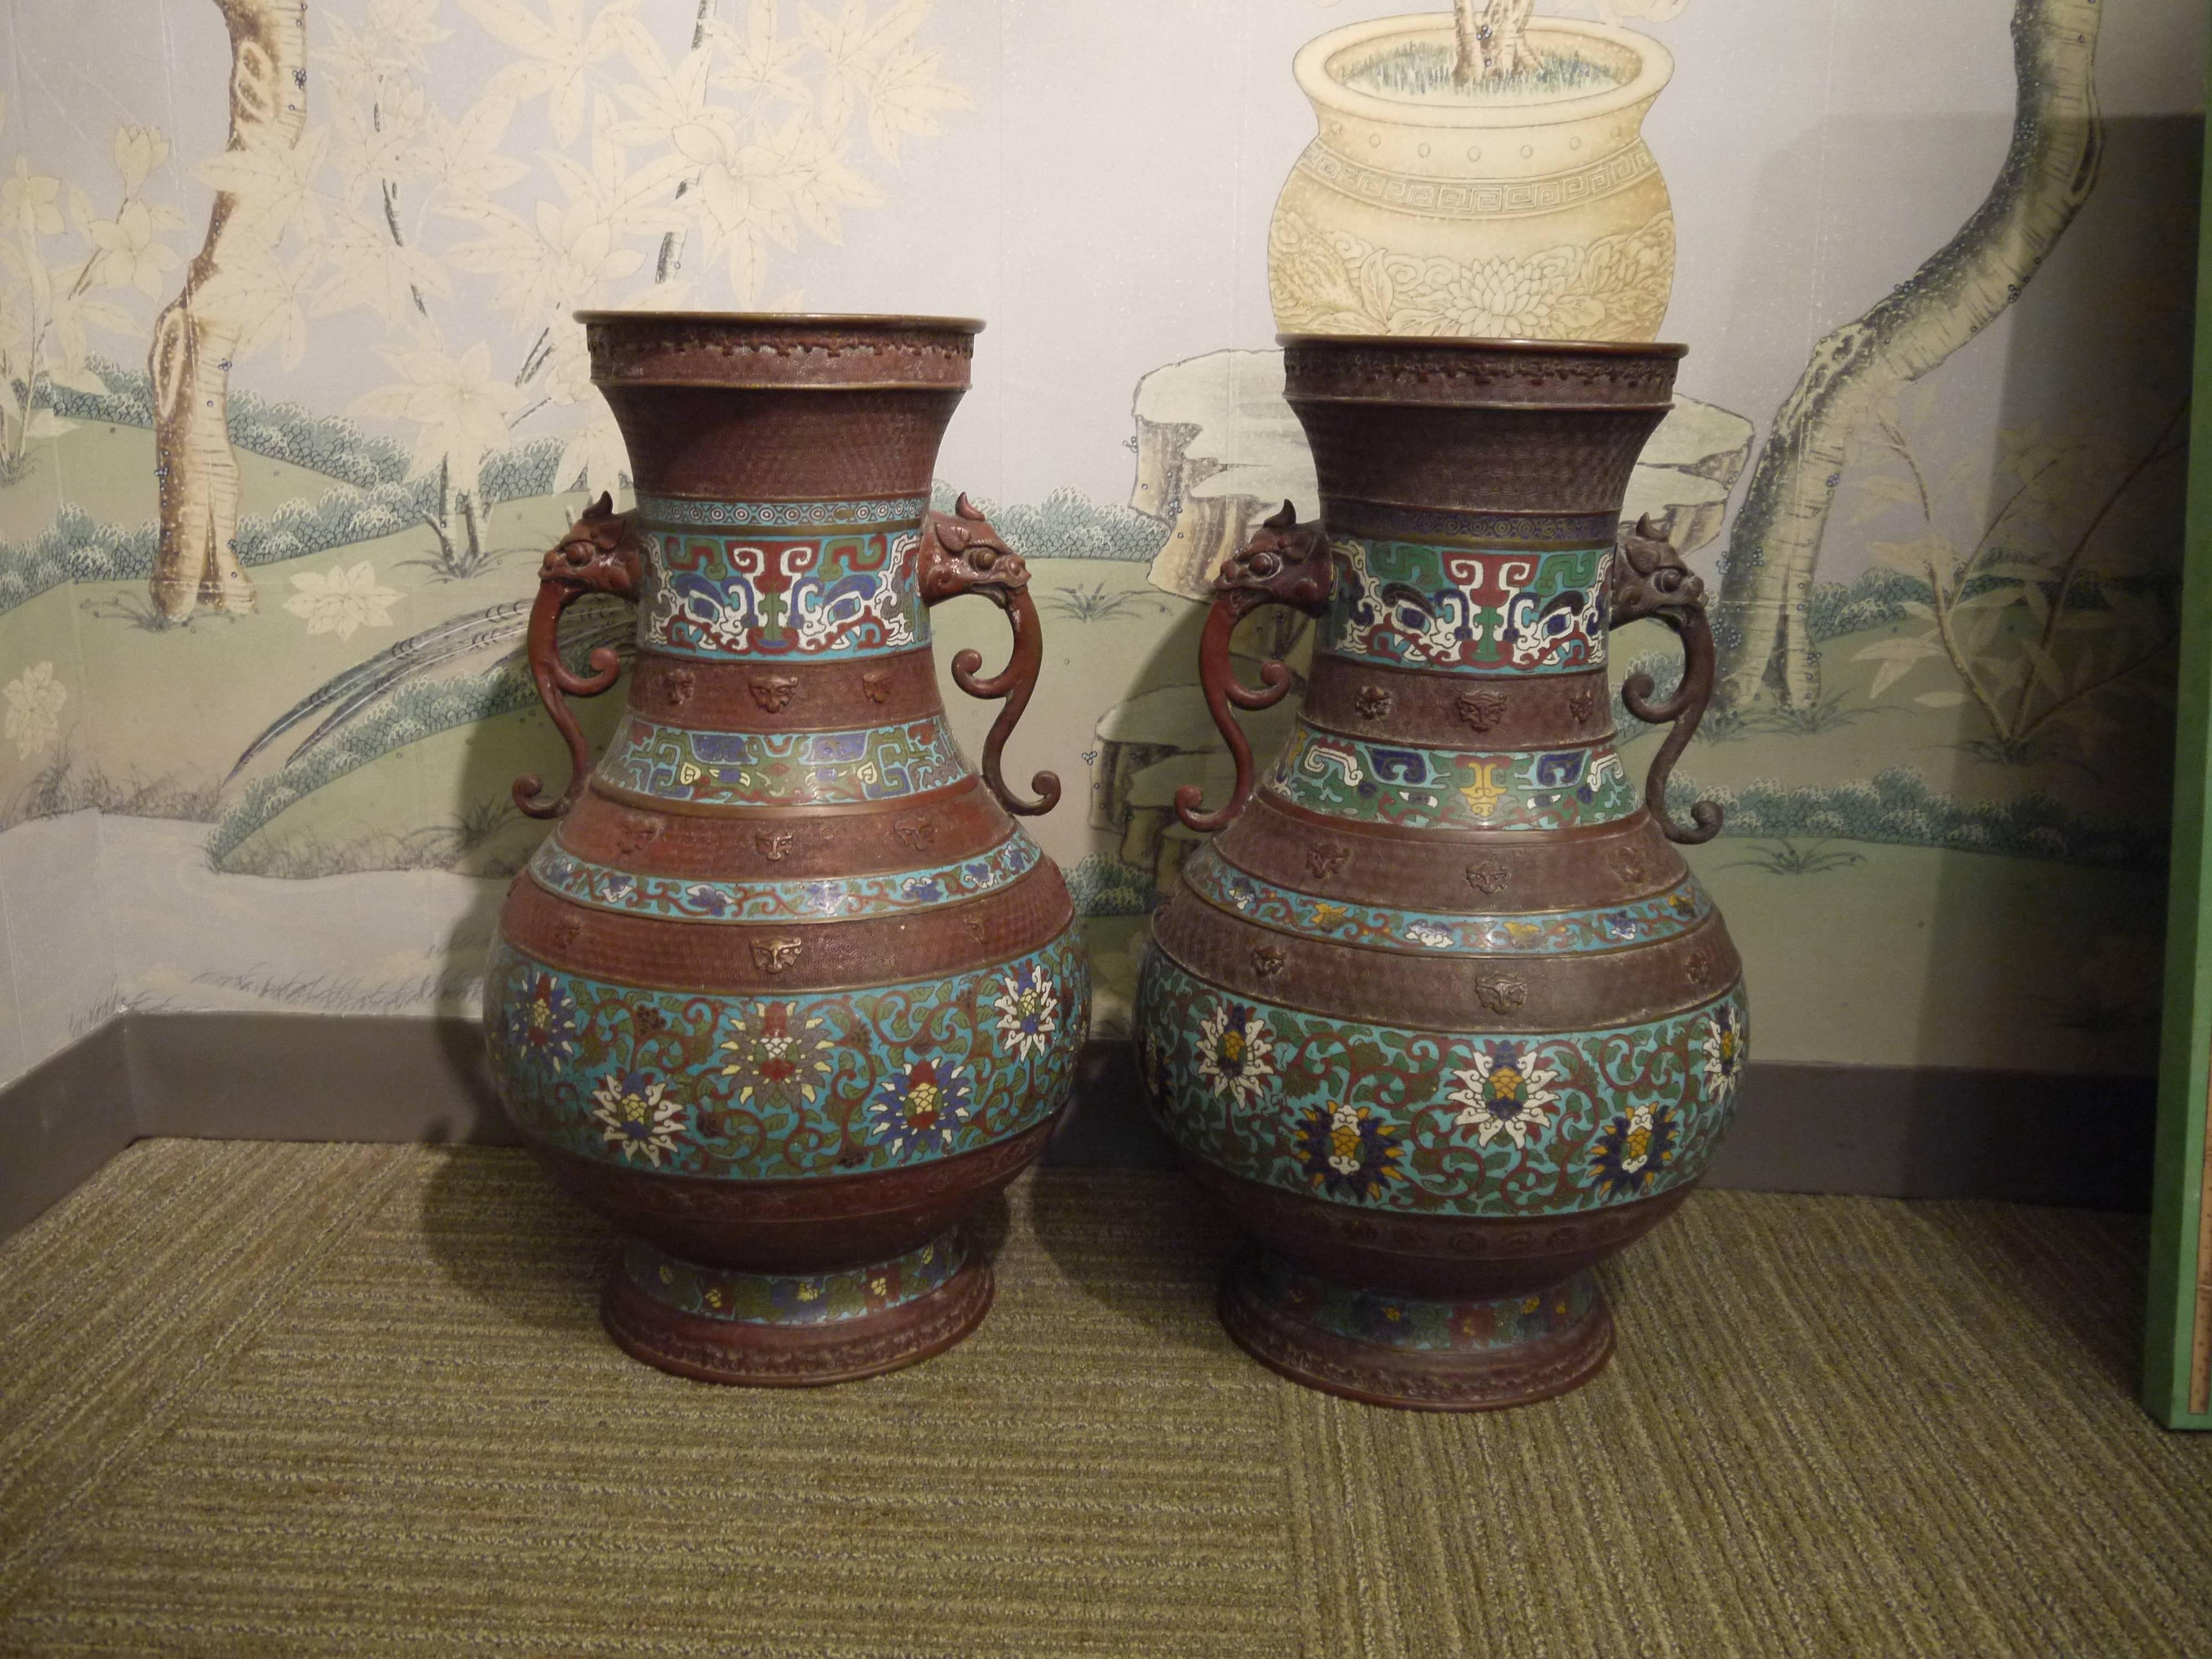 Turn of the 20th century pair of metal vases with inlaid enamel design in bands of bold patterns, with lion handles.